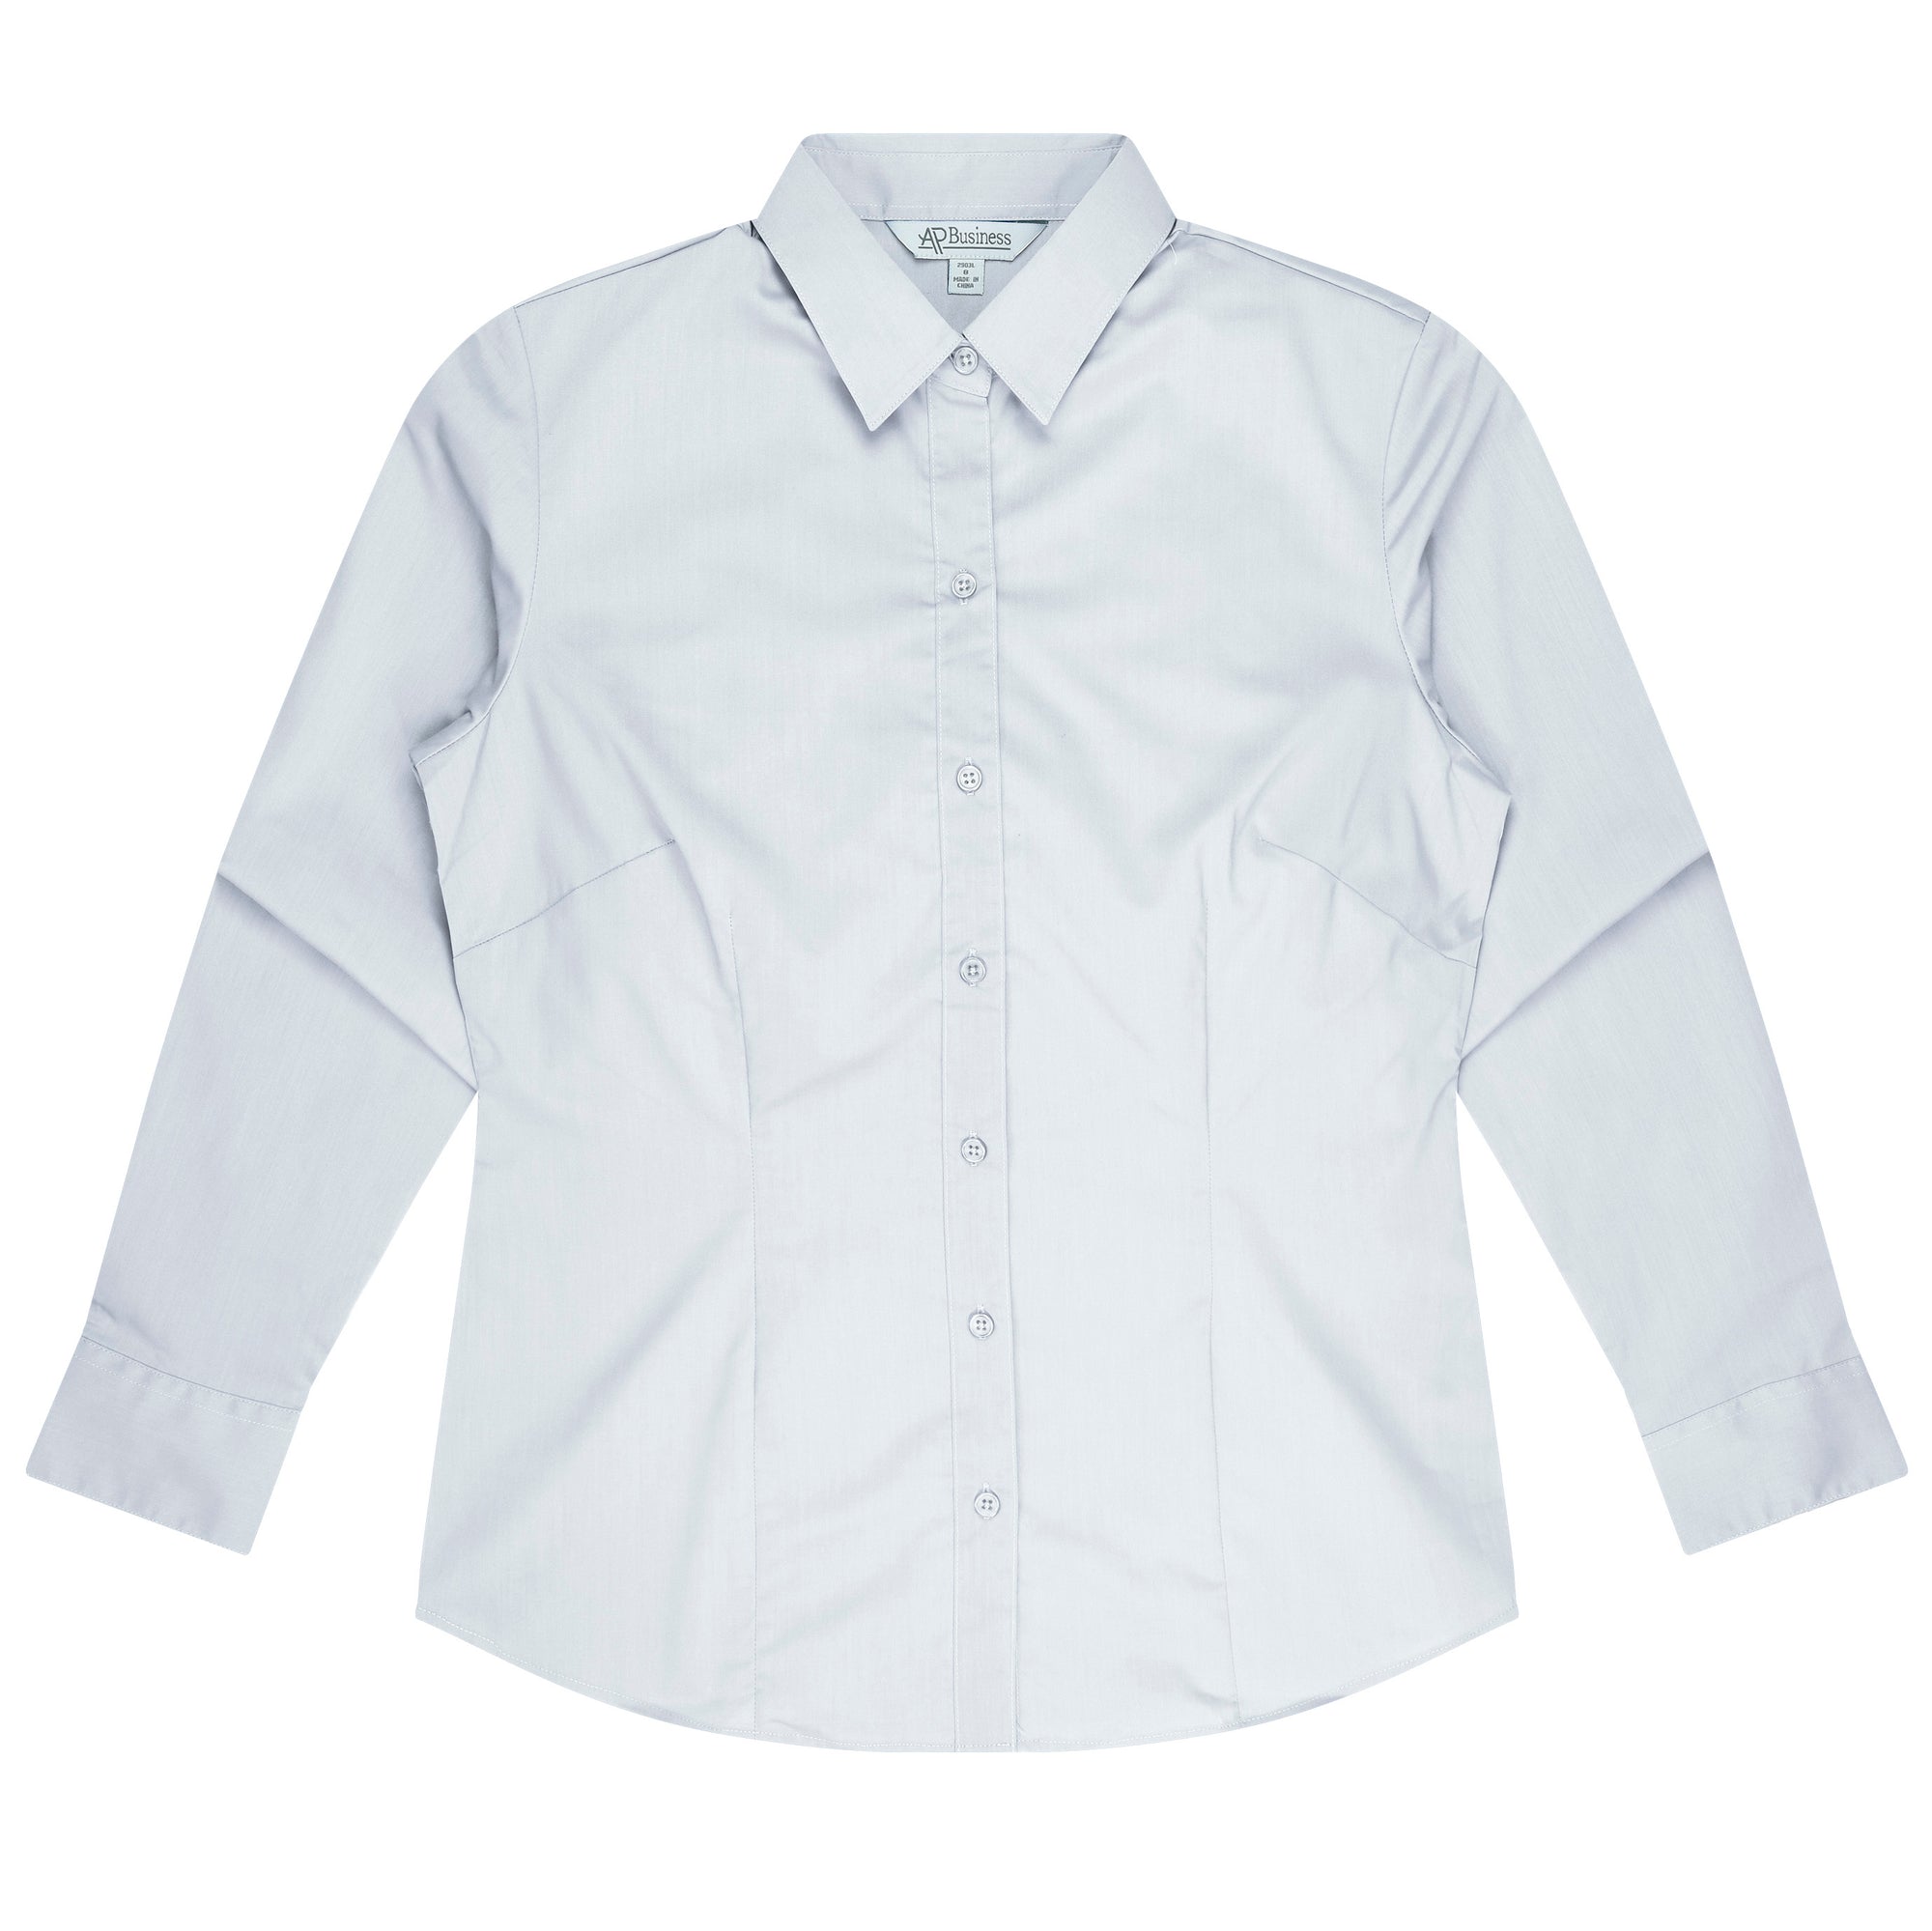 Mosman Embroidered Ladies Long Sleeve Business Shirt - White